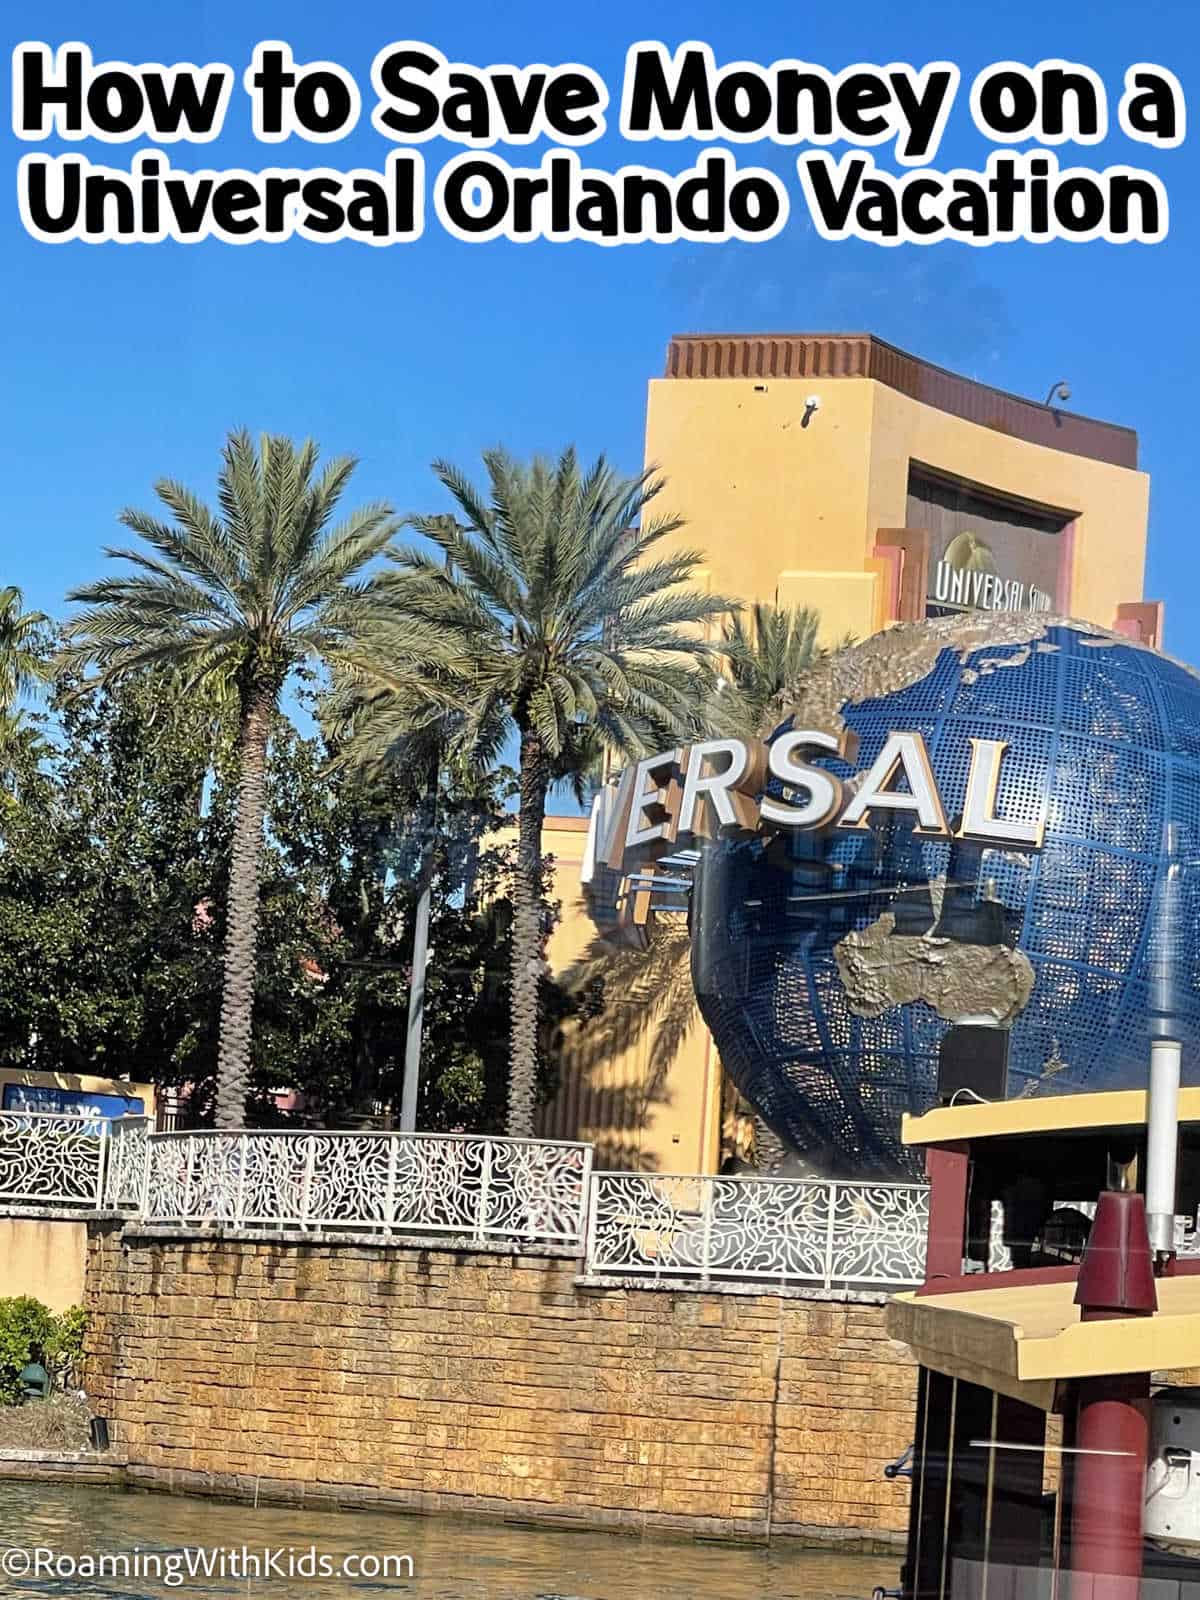 How to Save Money on a Universal Orlando Vacation